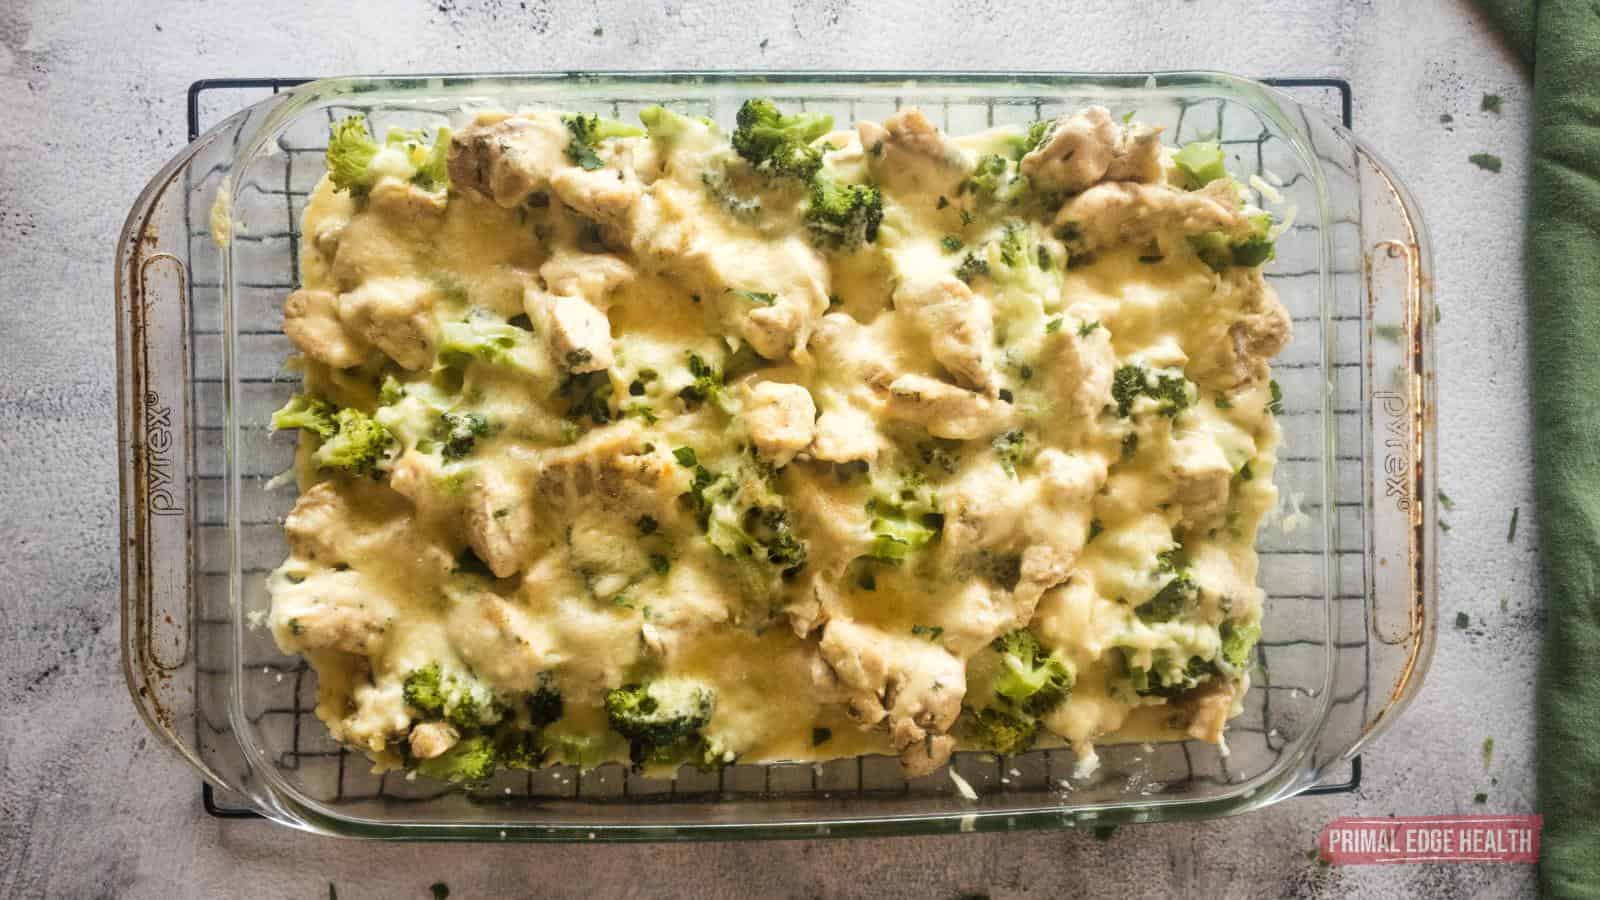 <p>This speedy casserole brings together the classic combination of chicken, broccoli, and creamy alfredo sauce in a comforting dish. With minimal prep and a short cooking time, this recipe is perfect for busy weeknights.<br><strong>Get the Recipe: </strong><a href="https://www.primaledgehealth.com/keto-chicken-alfredo-with-broccoli/?utm_source=msn&utm_medium=page&utm_campaign=msn">Chicken Broccoli Alfredo Casserole</a></p>